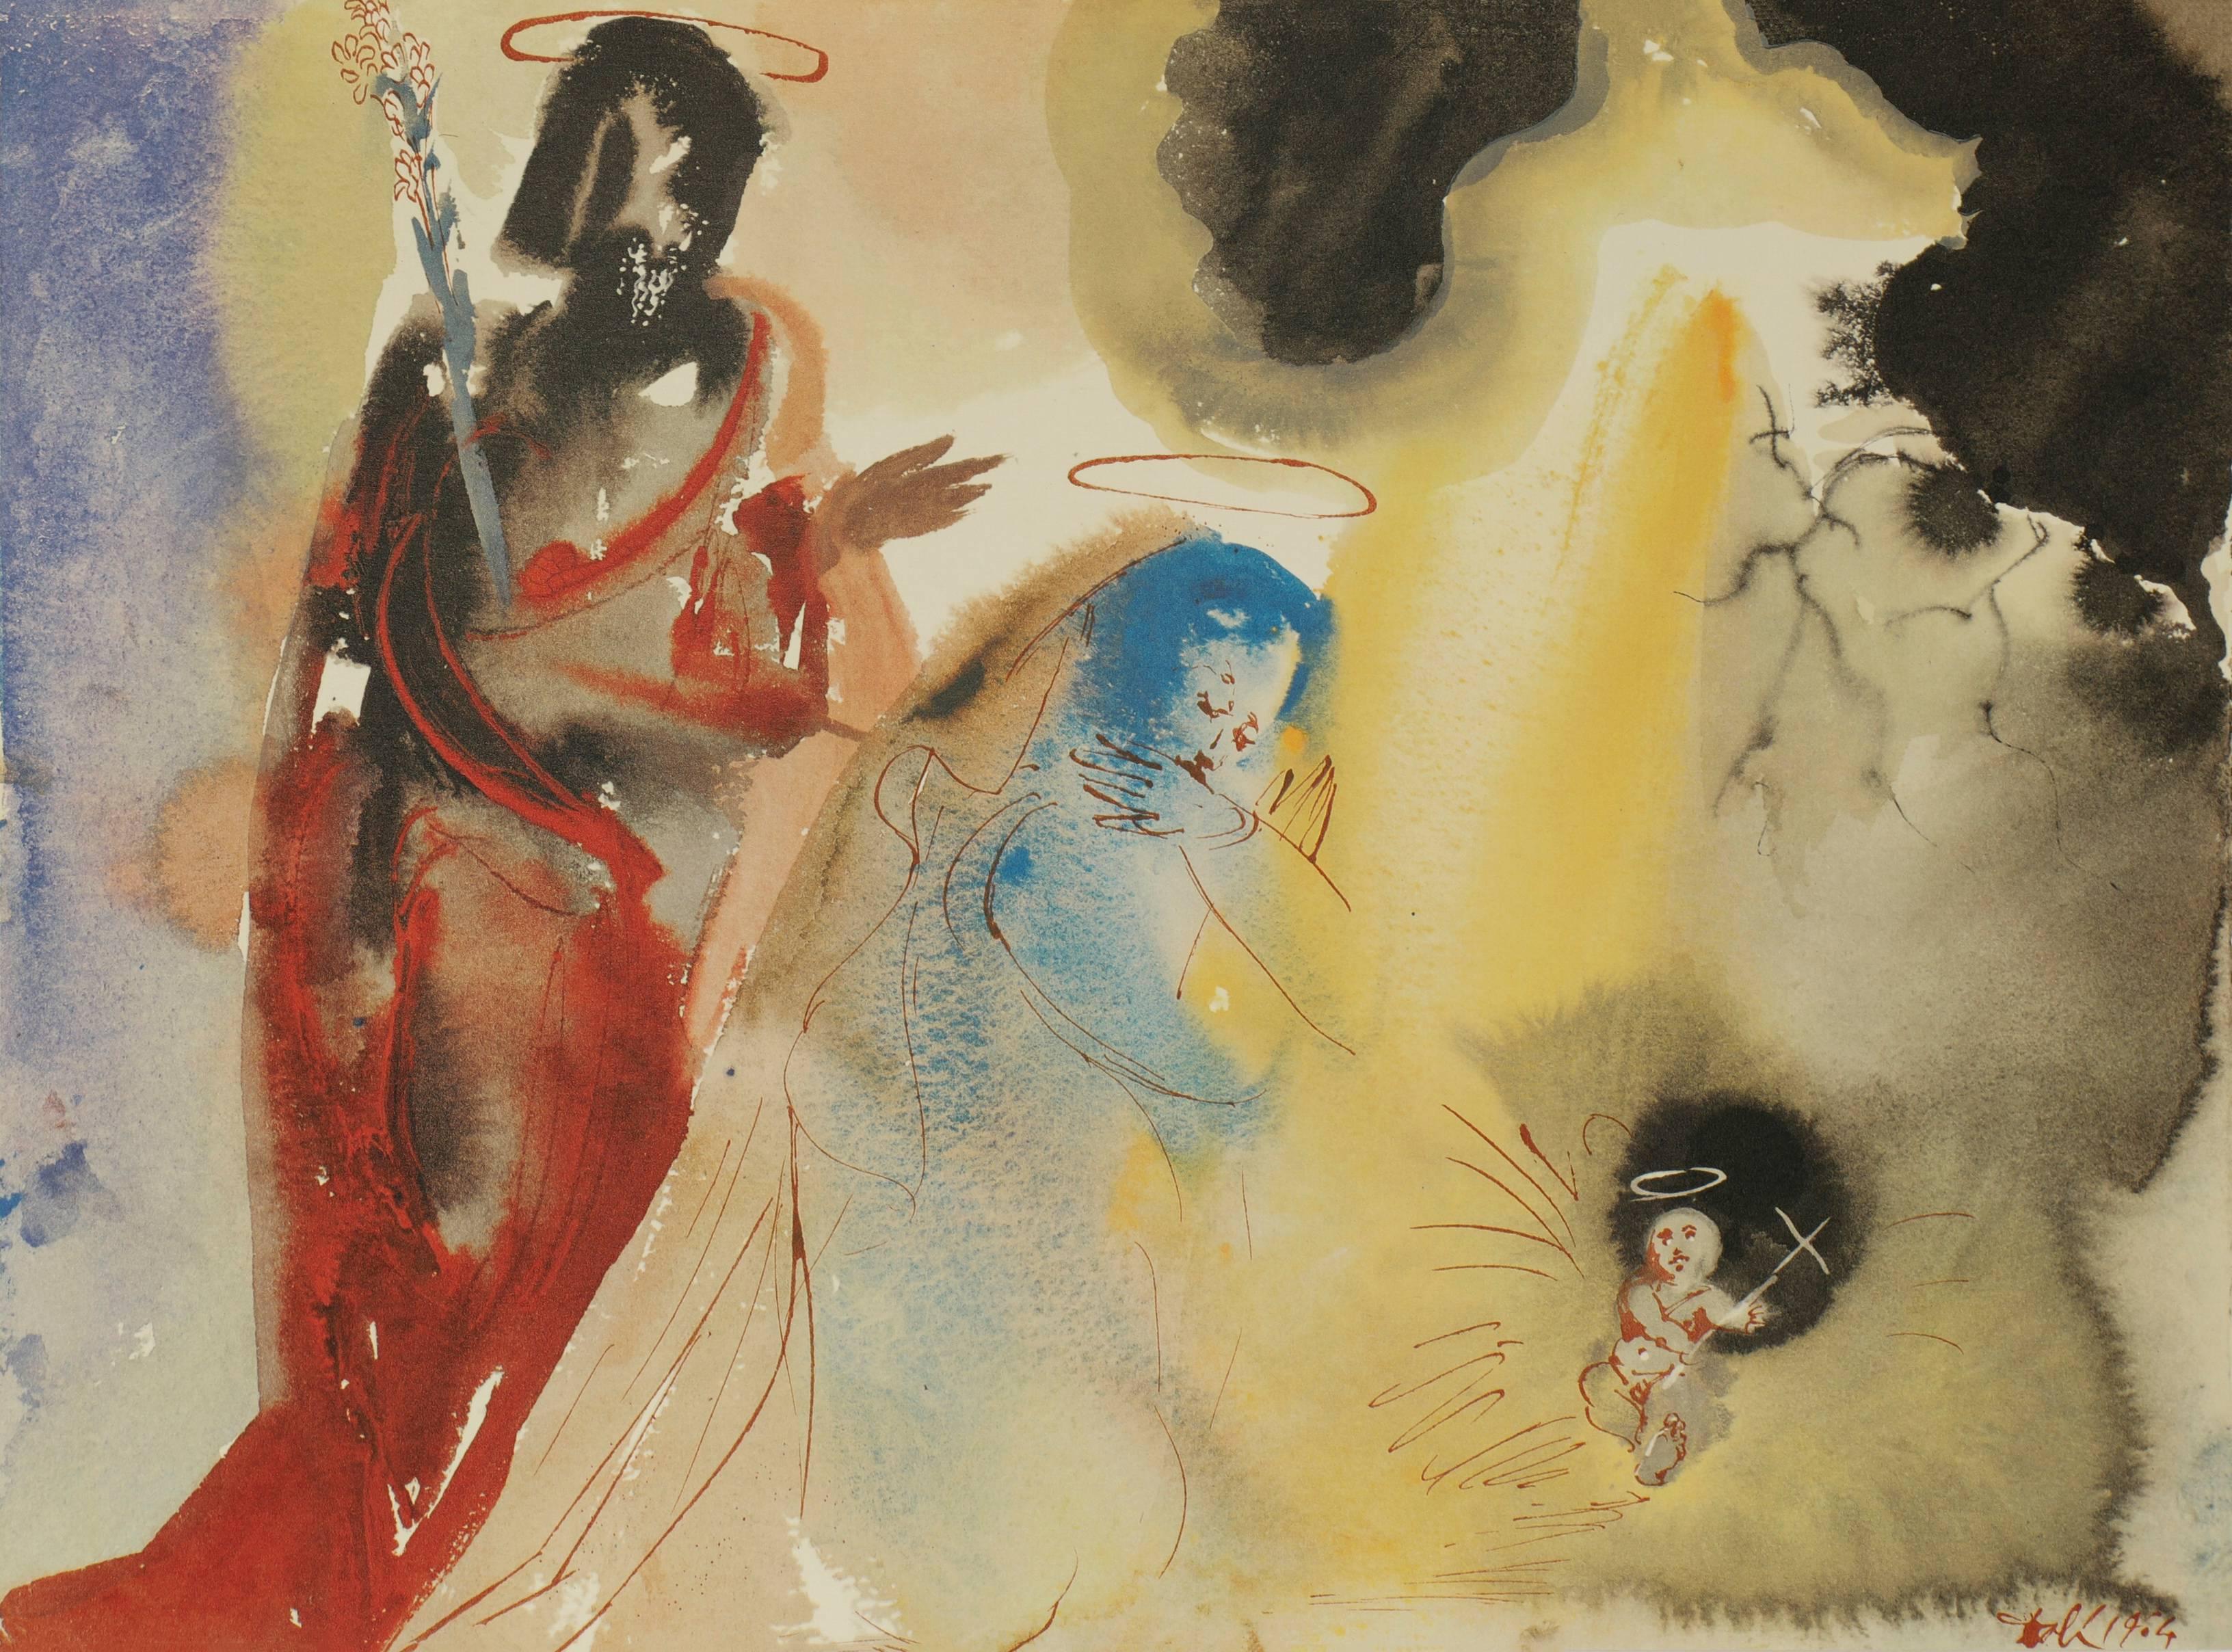 Salvador Dalí Figurative Print - "Her Child is of the Holy Spirit"